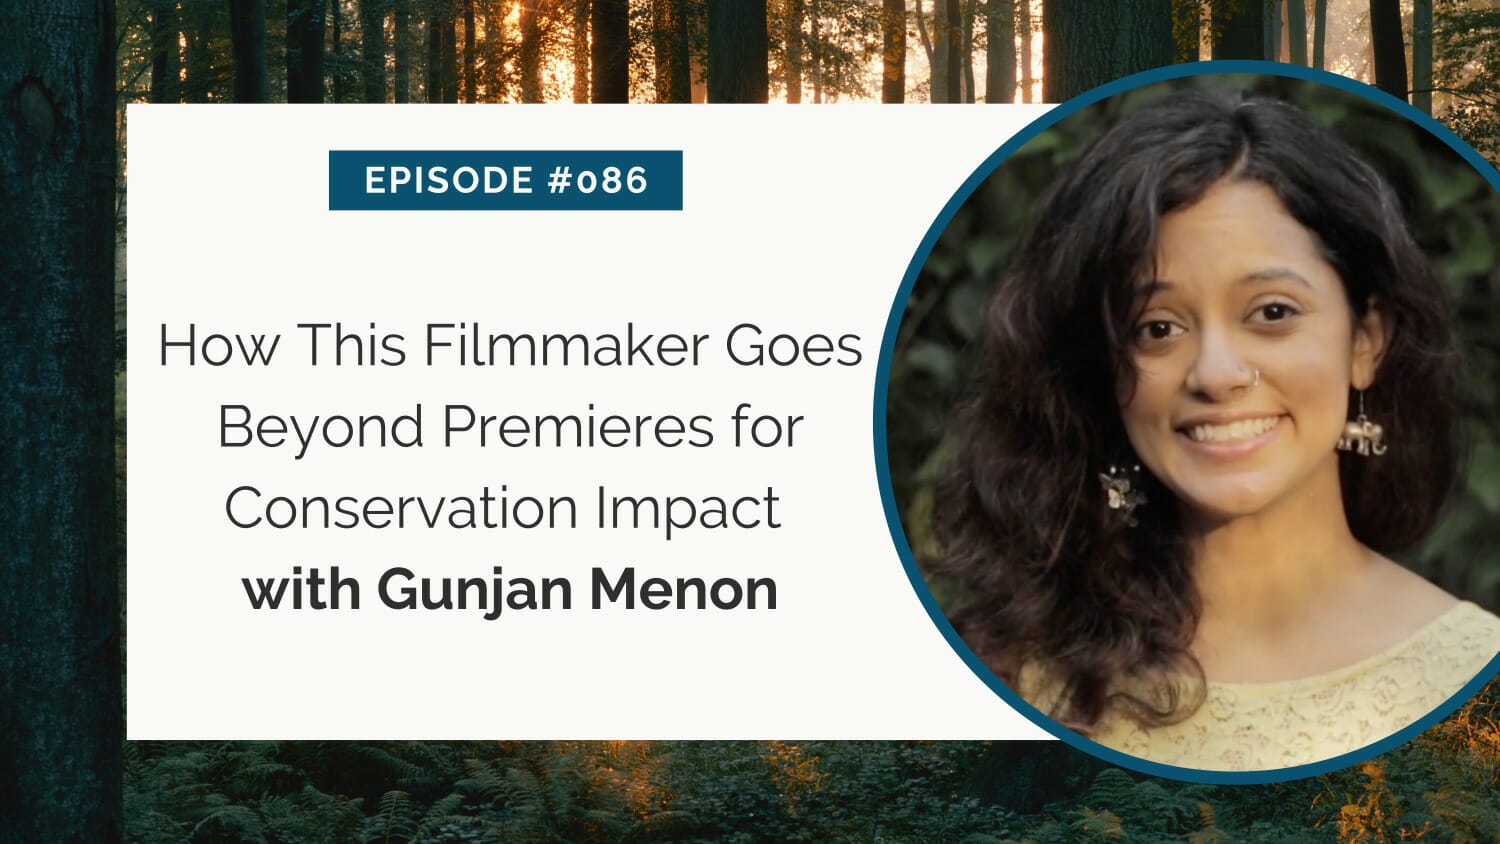 Podcast episode graphic featuring guest gunjan menon discussing filmmaker strategies for conservation impact, set against a forest backdrop.